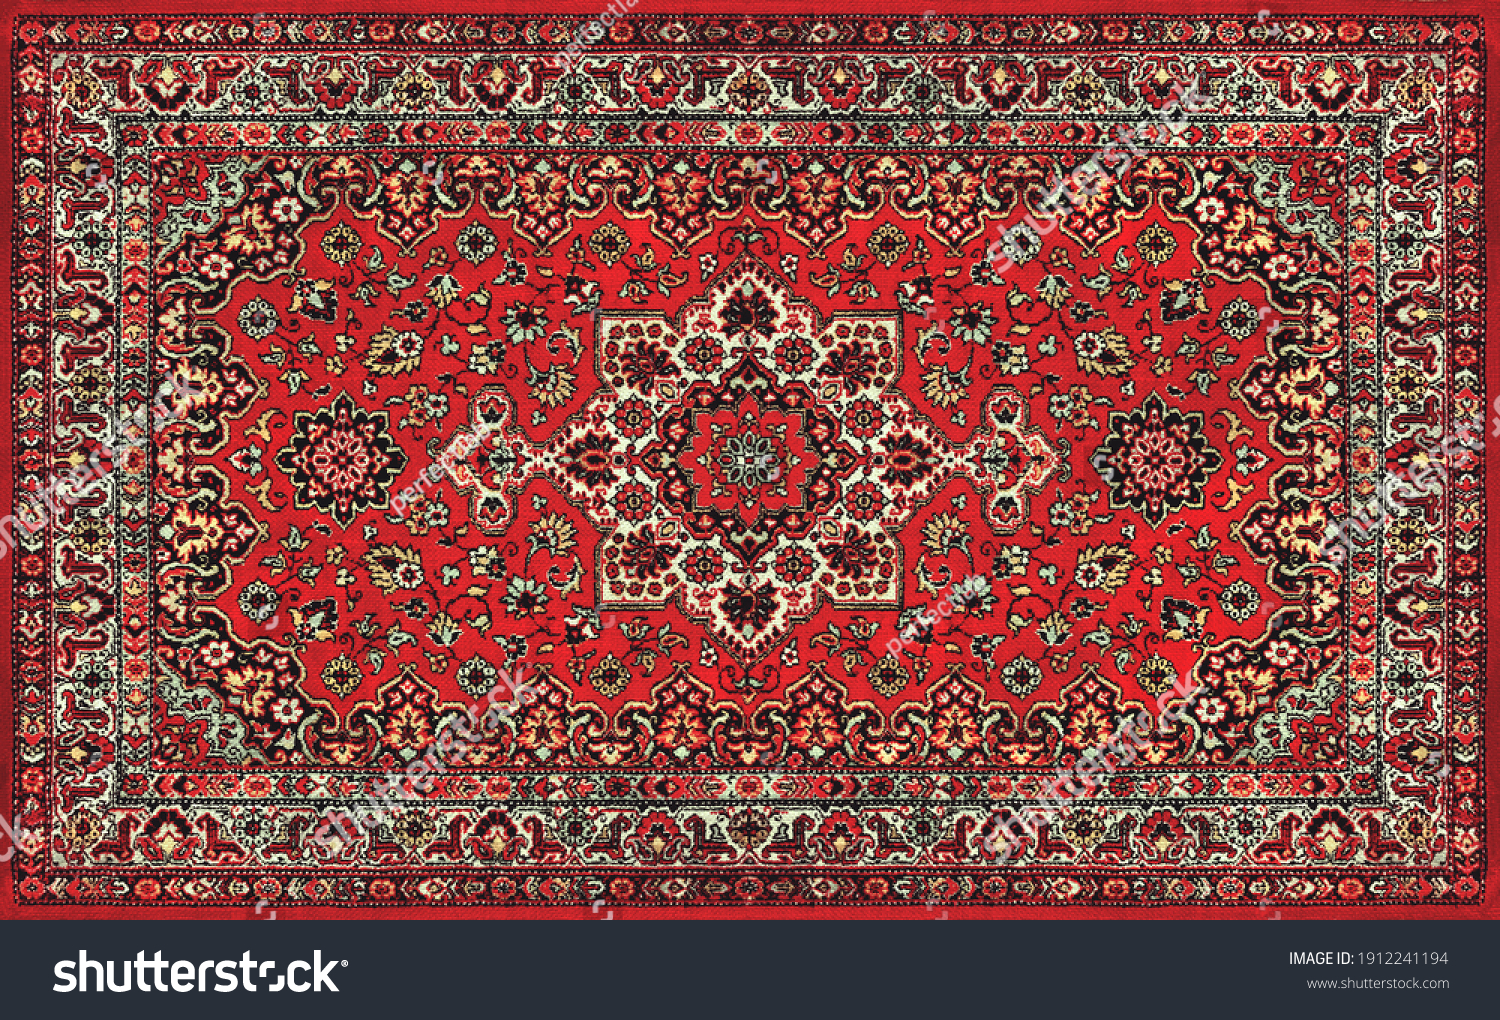 Part of Old Red Persian Carpet Texture, abstract ornament #1912241194